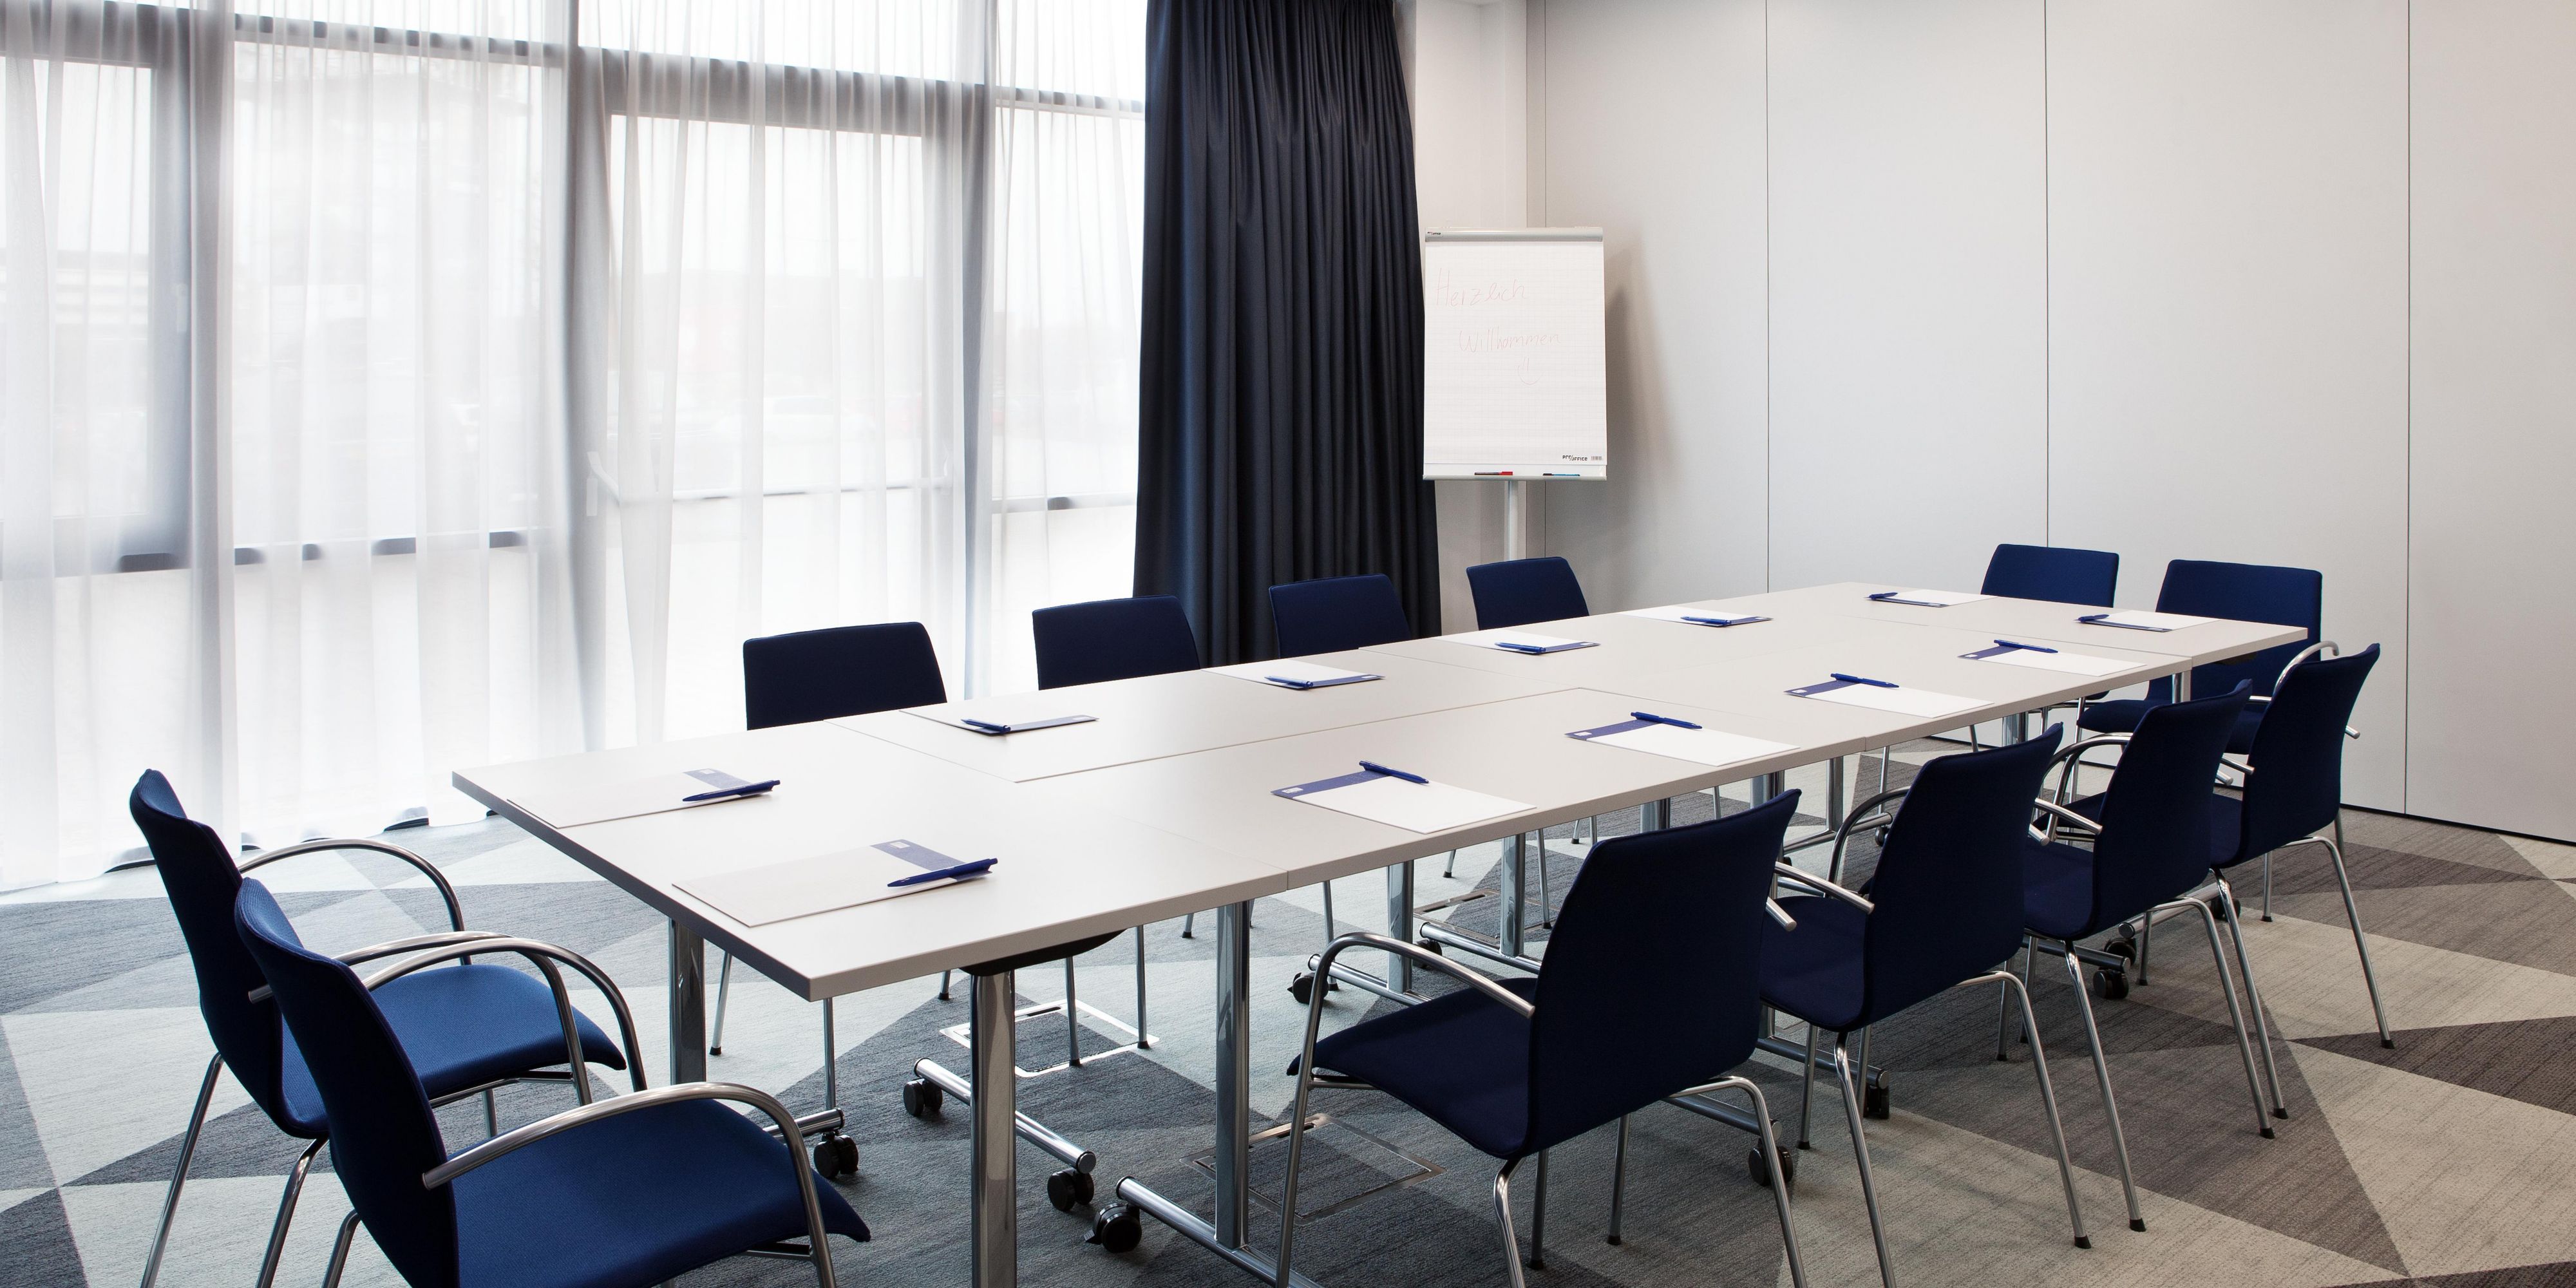 Two daylighted meeting rooms with 35 sqm each, equipped with beamer, screen, WLan, flipchart, and moderator case are available. It can be connected to one big room.